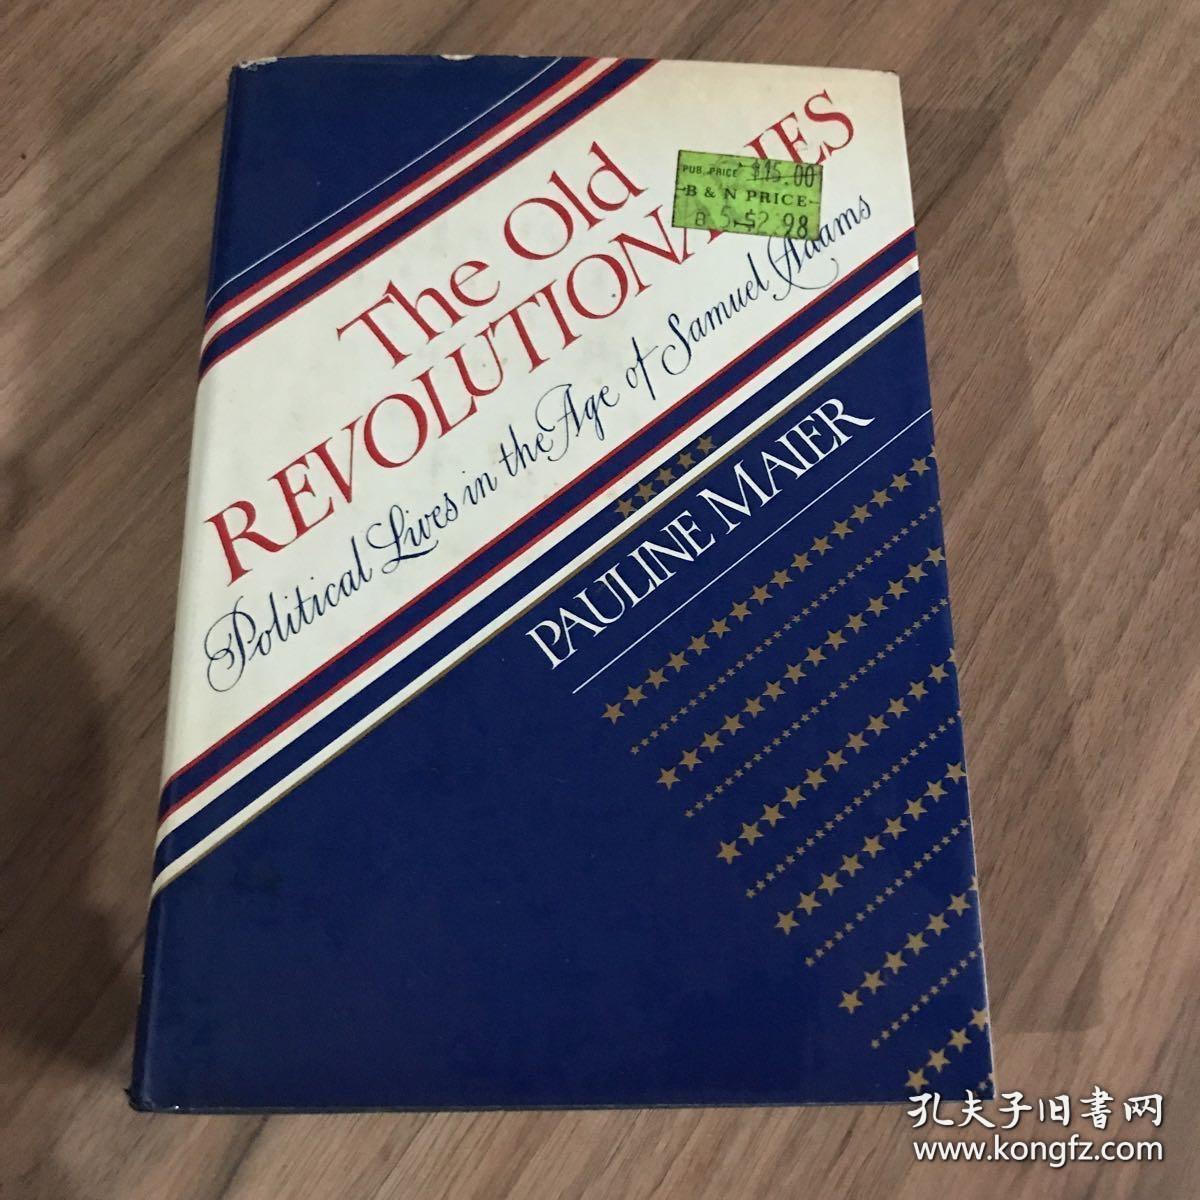 THE  OLD  REVOLUTIONARIES
Political  Lives  in  the  Age  of  Samuel  Adams
老革命者   亚当斯时代的政治生活
by  Pauline  Maier    1980年 毛边本